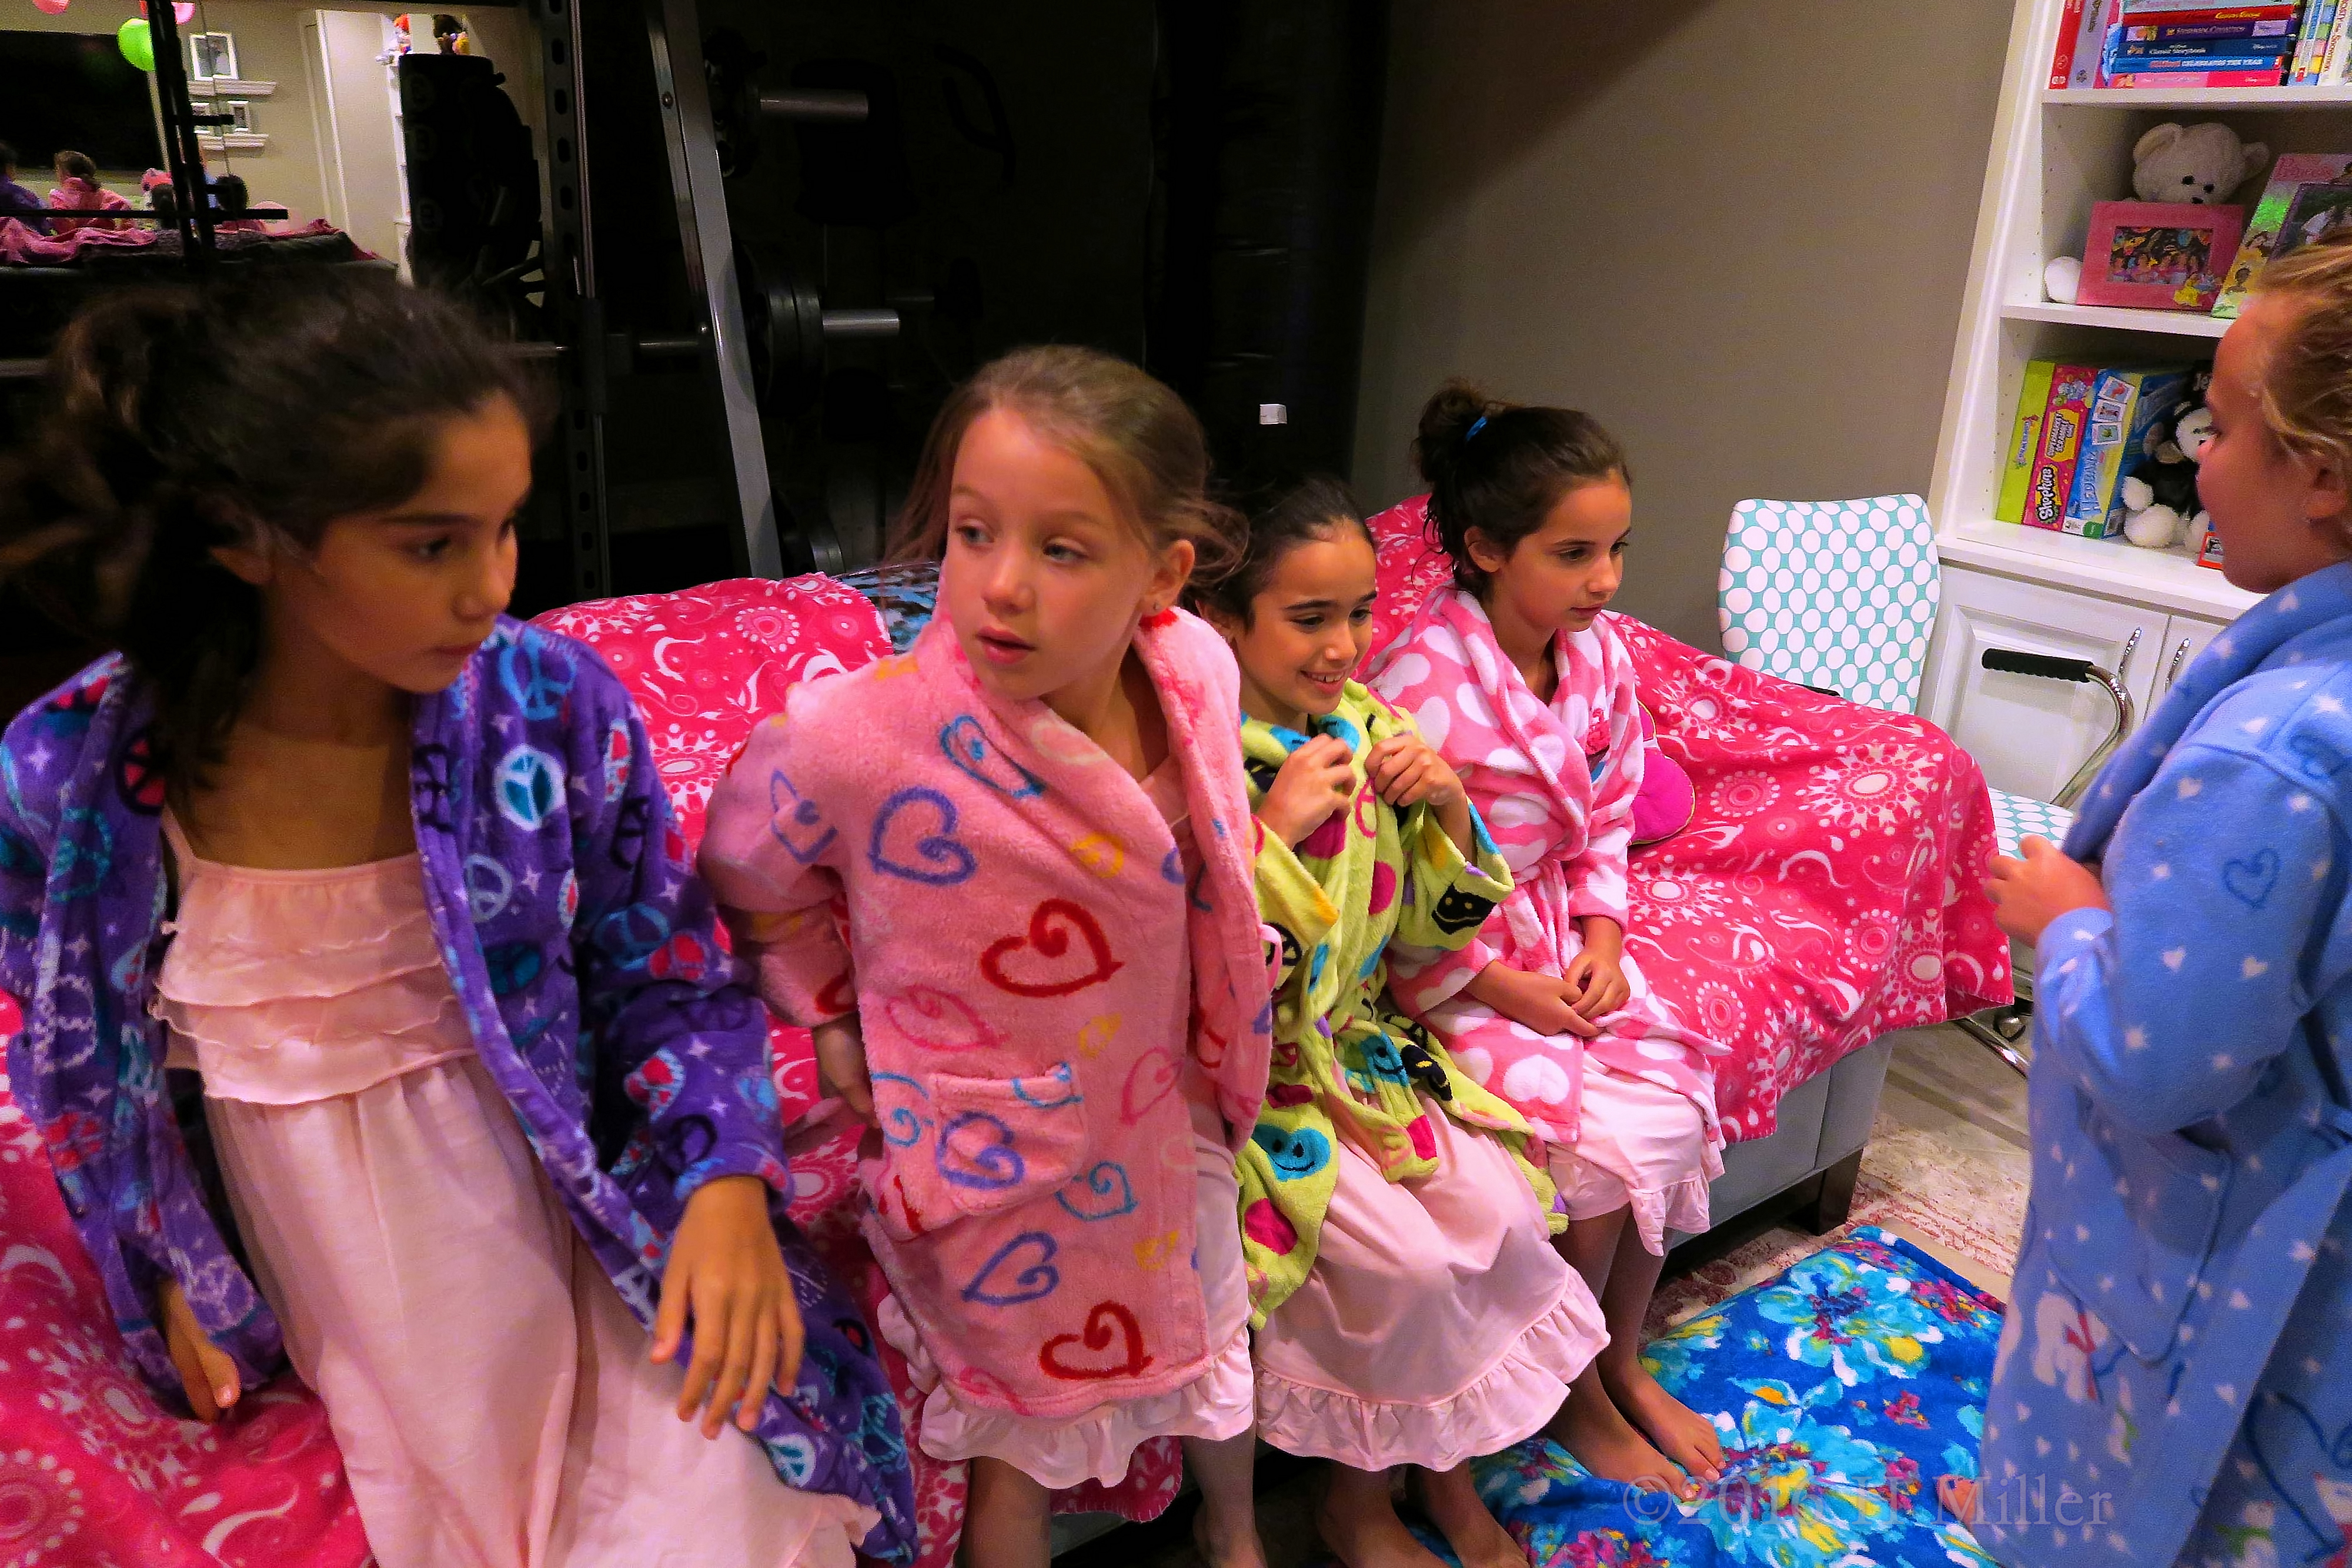 Kids Spa Party For Annual Sleepunder In New Jersey Gallery 1 